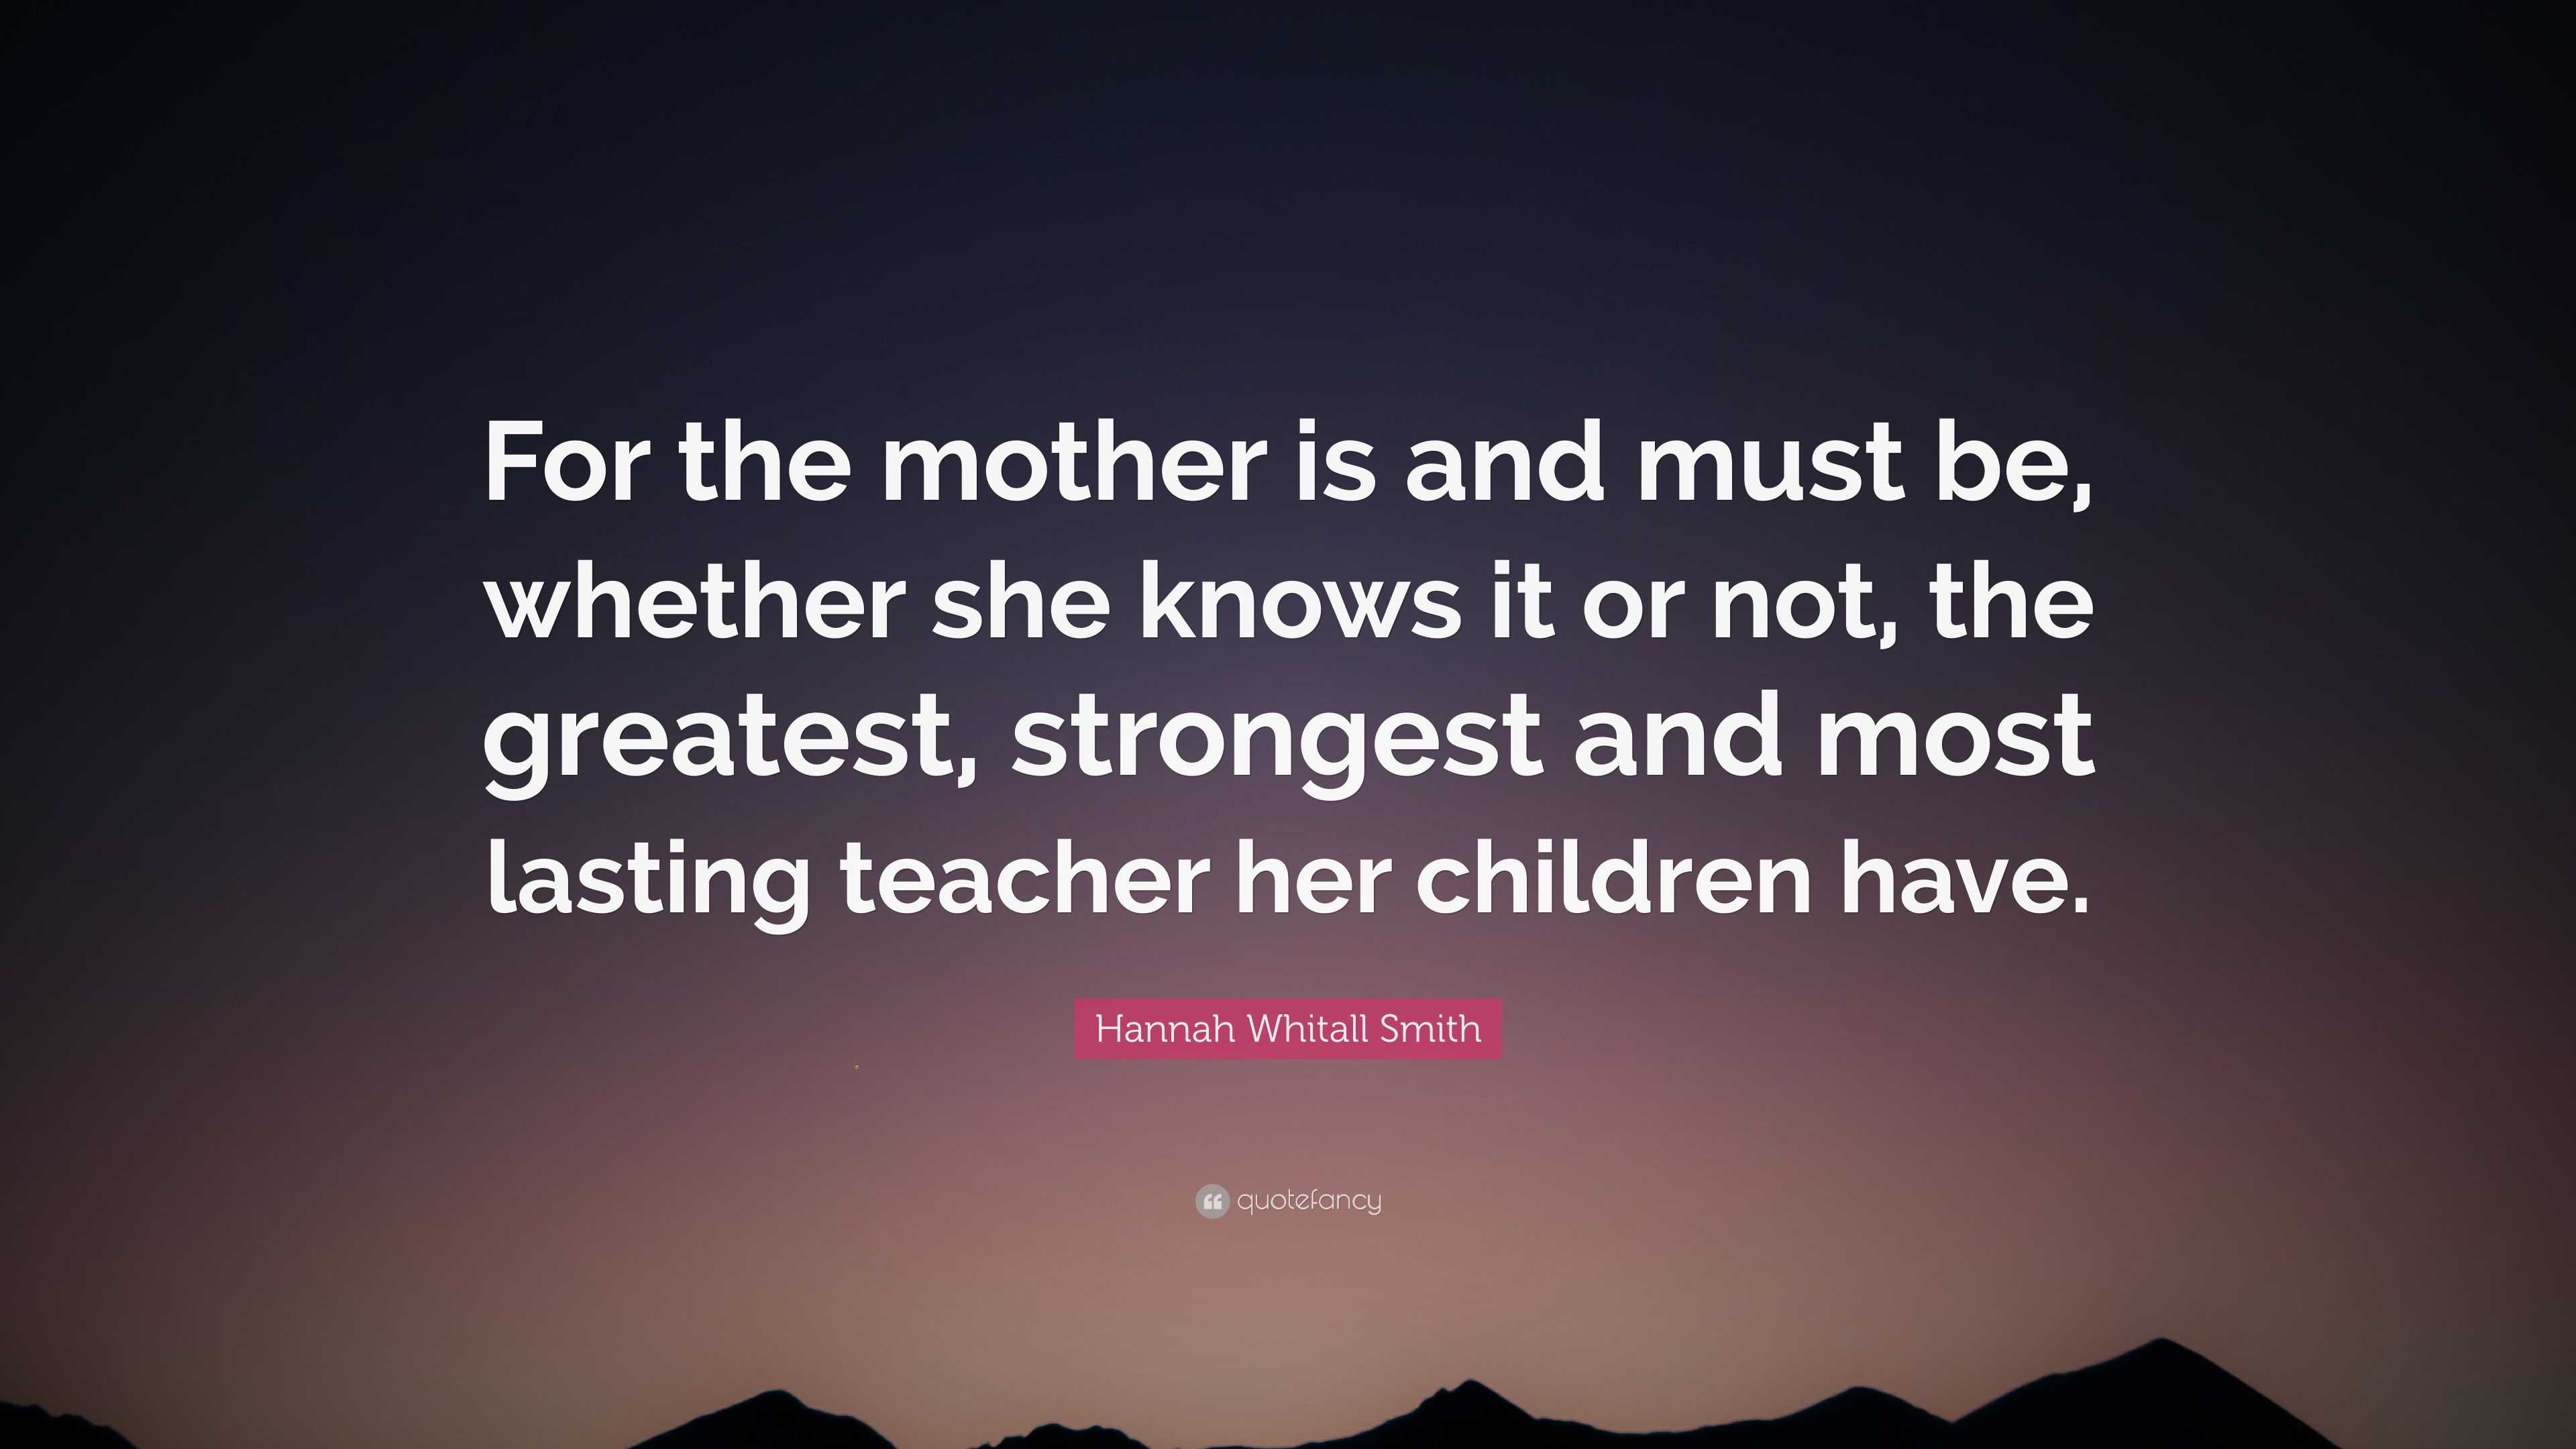 Hannah Whitall Smith Quote: “For the mother is and must be, whether she ...